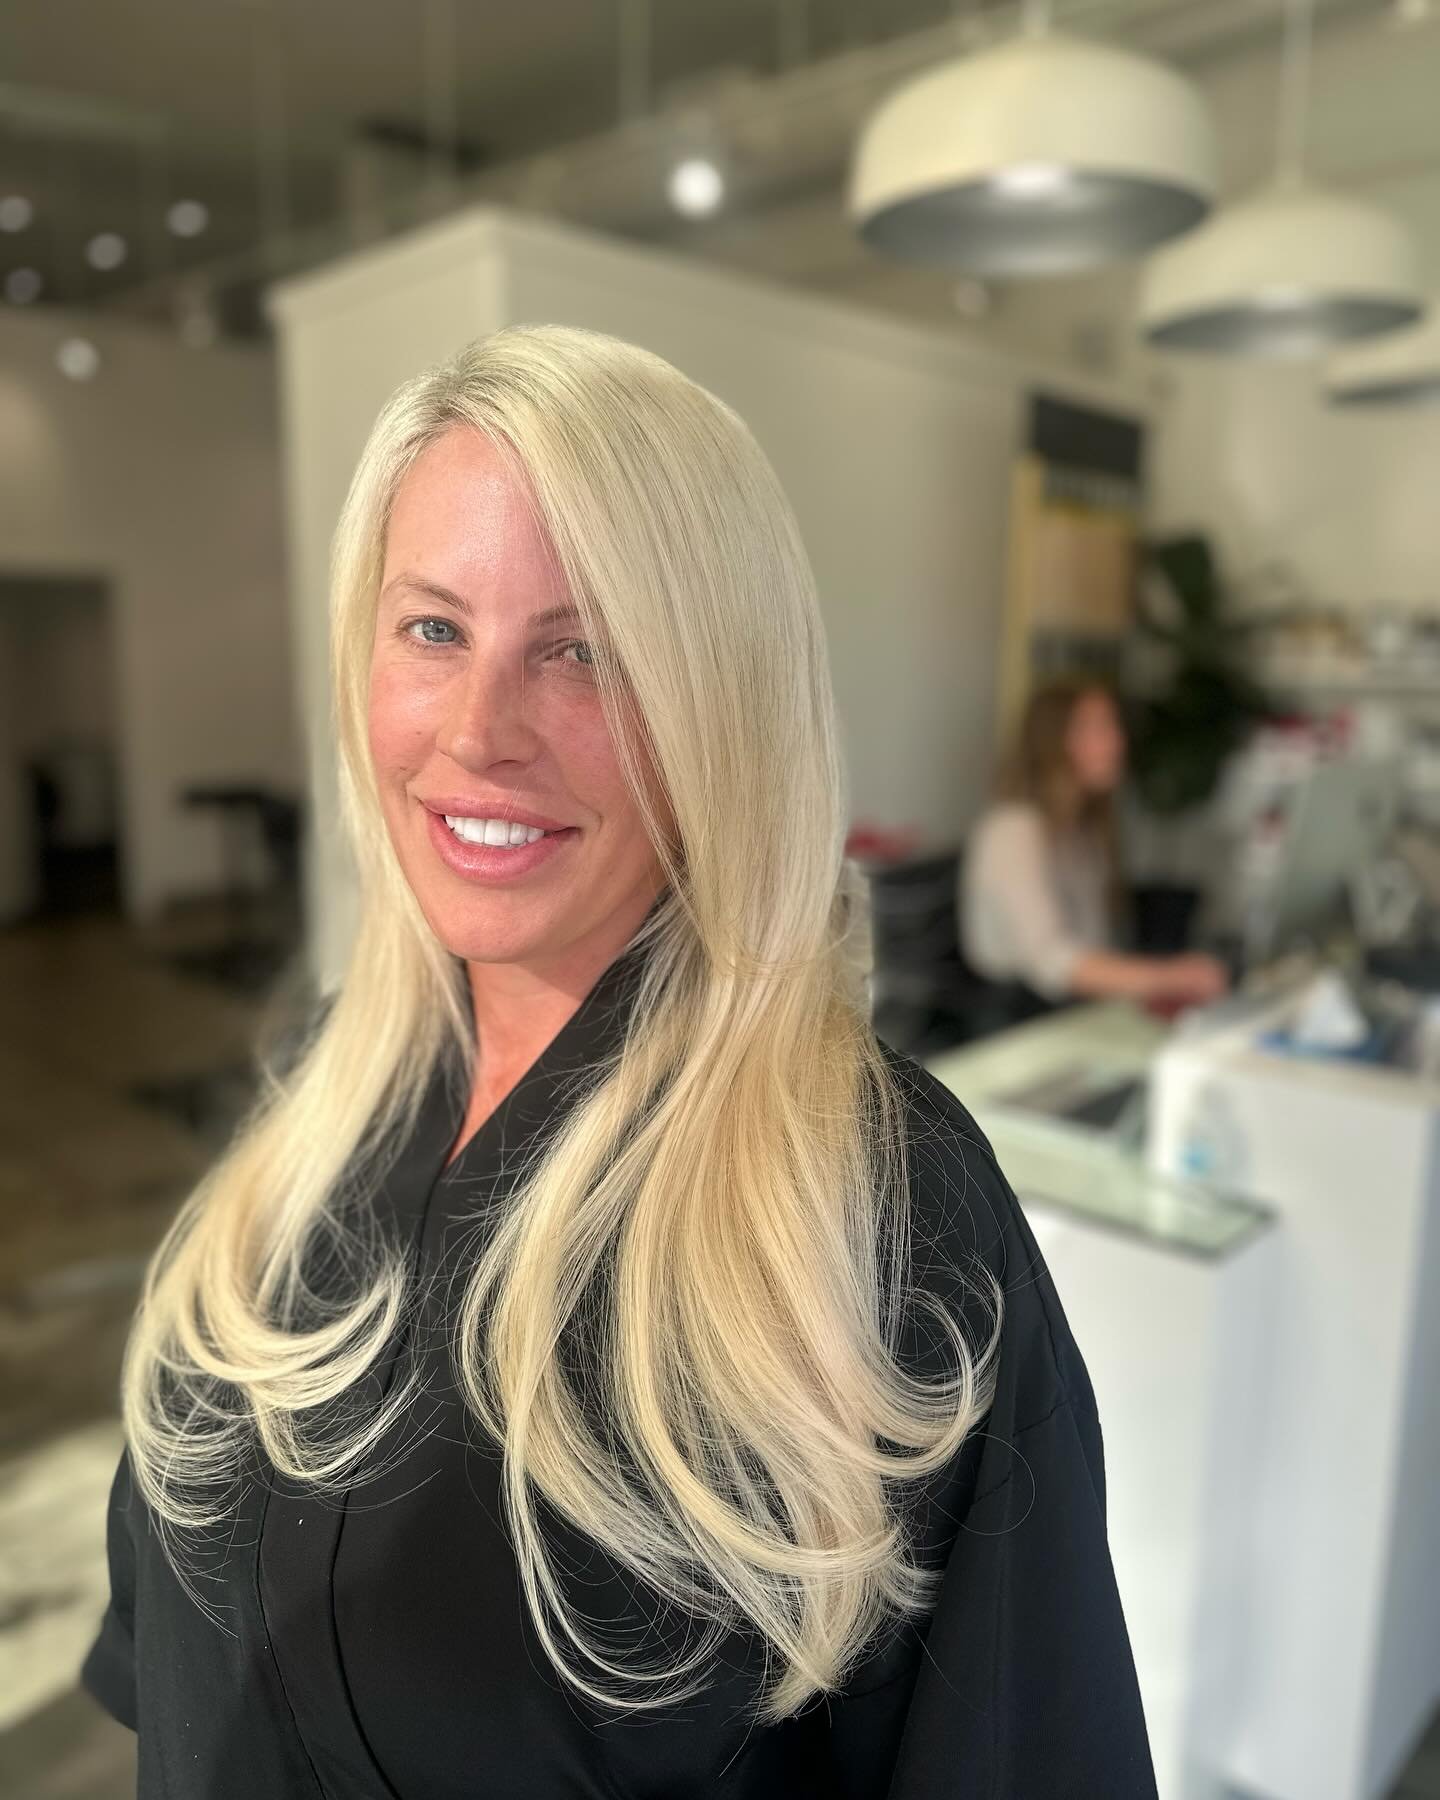 Brightening up your week with a full blonding session and a 20&rdquo; inch Bellami K-tip extension install by @candicebuckett this gal is definitely prepped for spring! ✨🫶🏼

It's easy to put off your hair appointment as just another item on your to